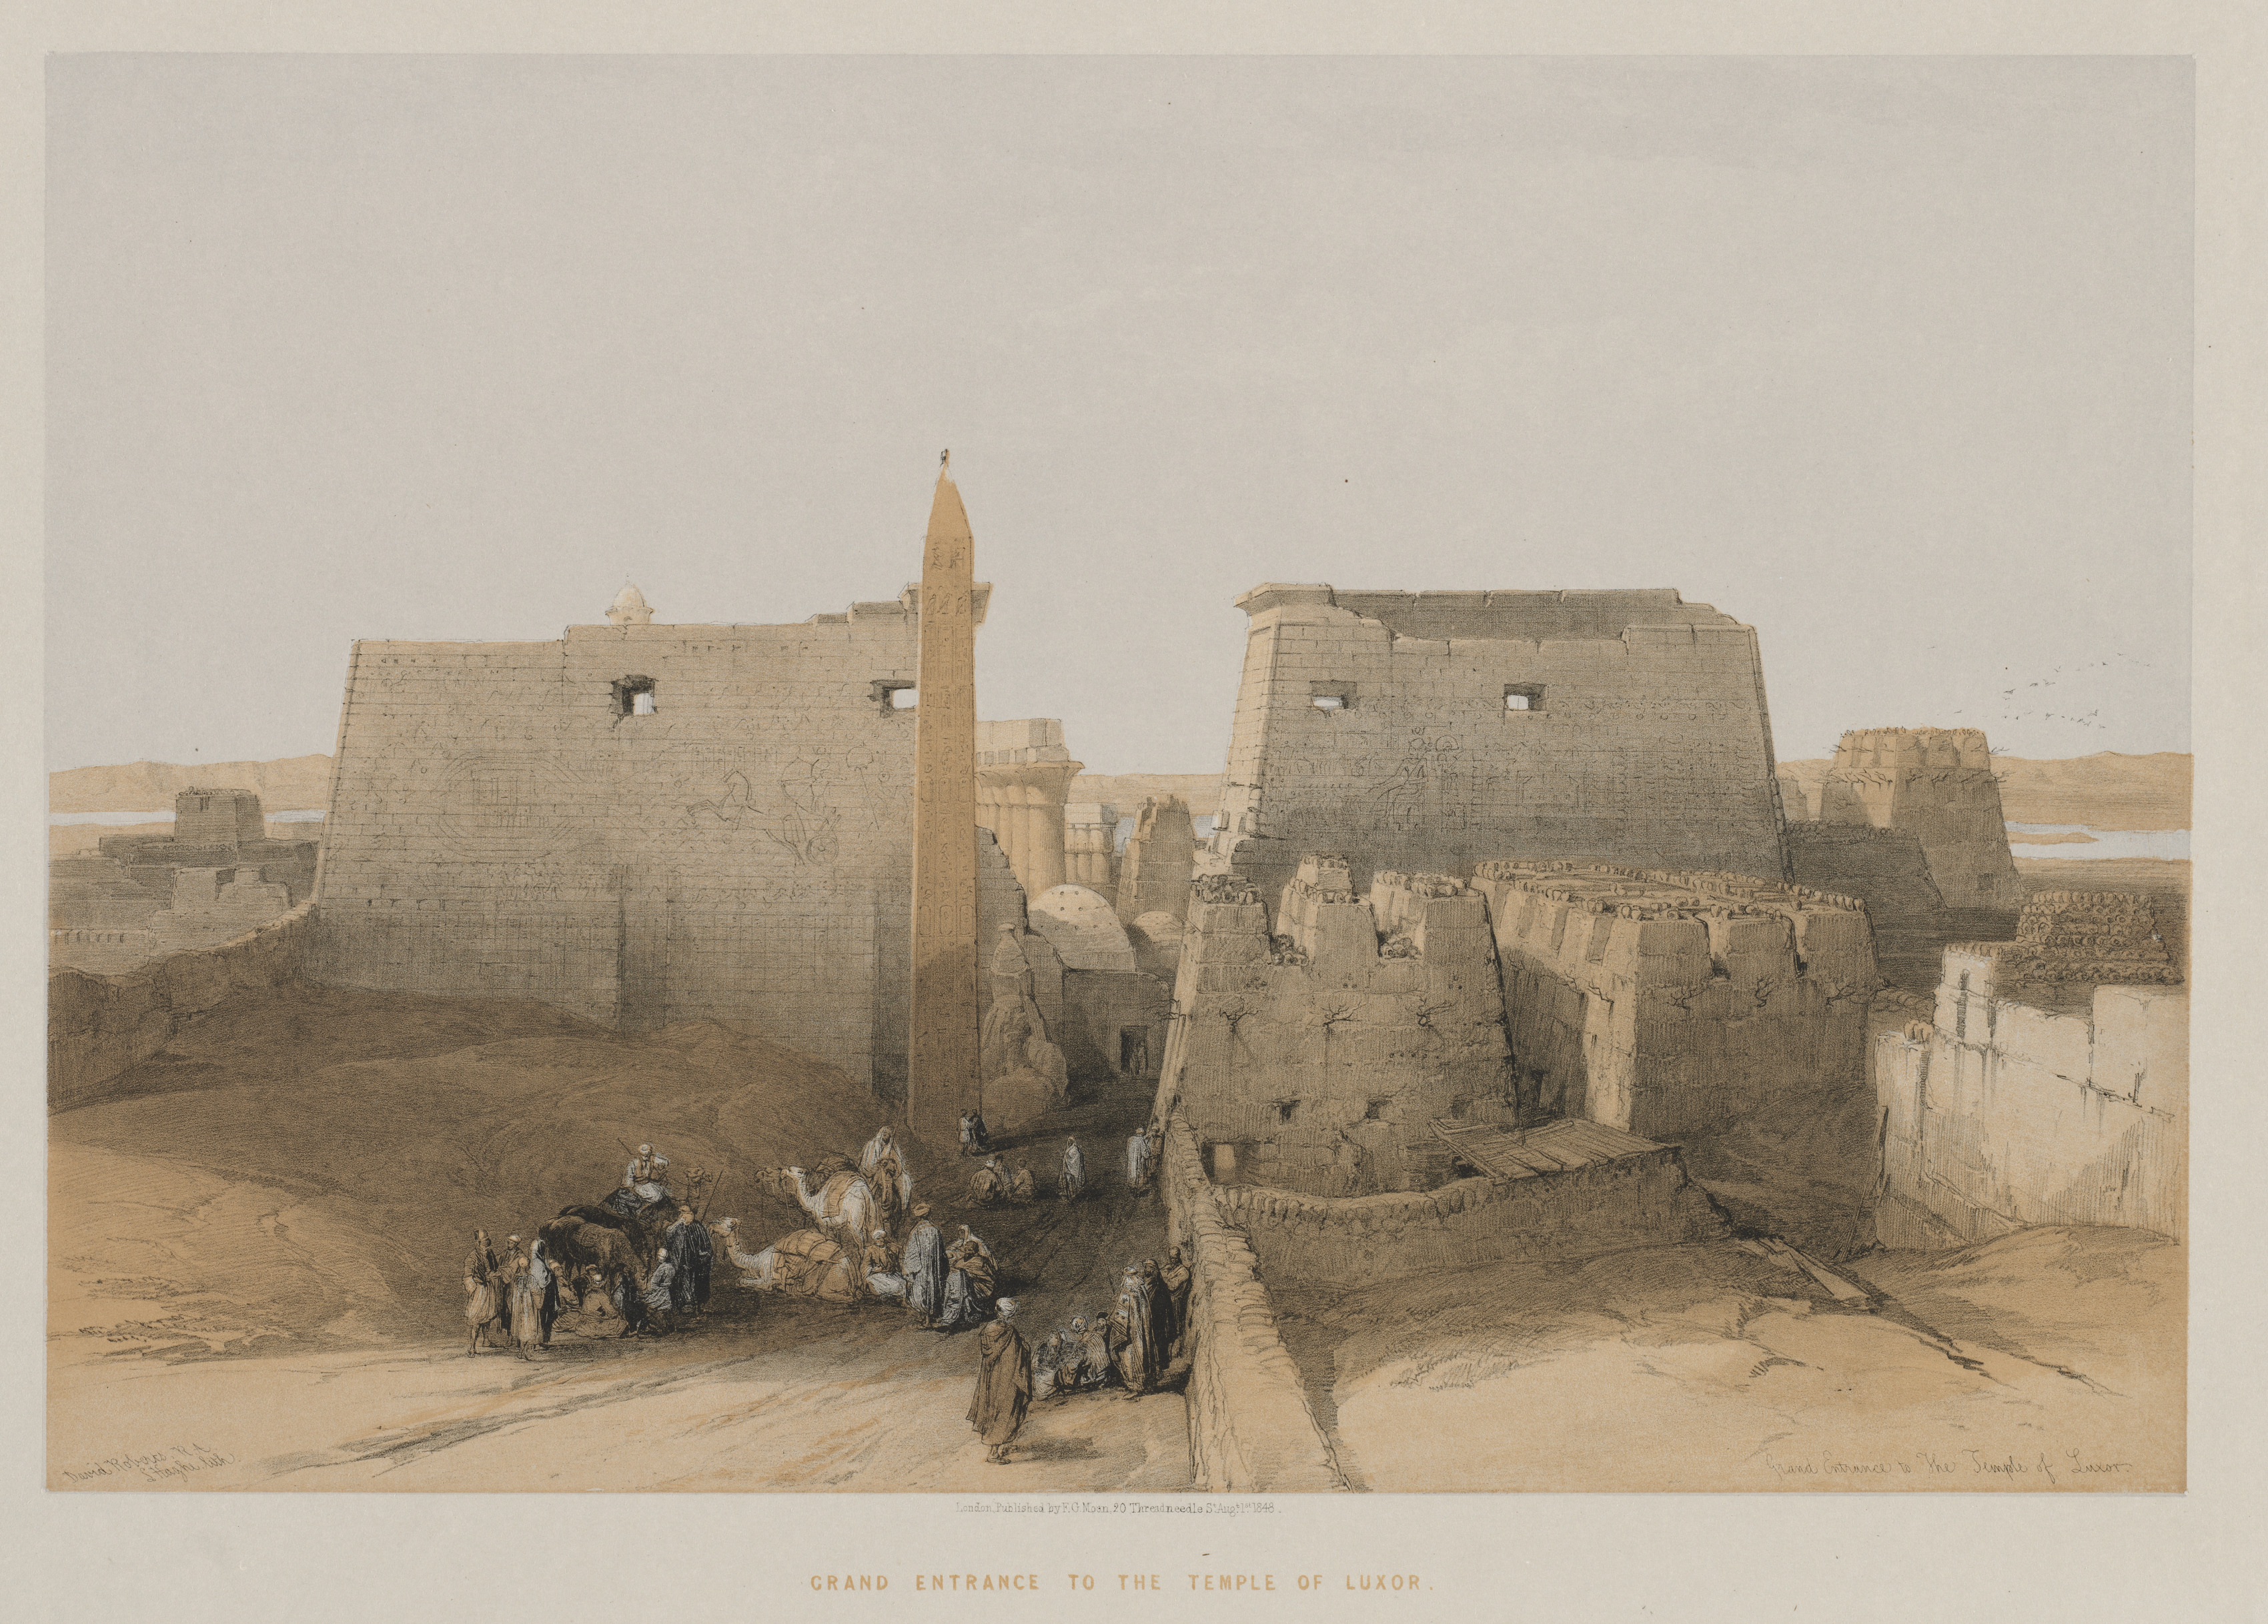 Egypt and Nubia, Volume II: Grand Entrance to the Temple of Luxor